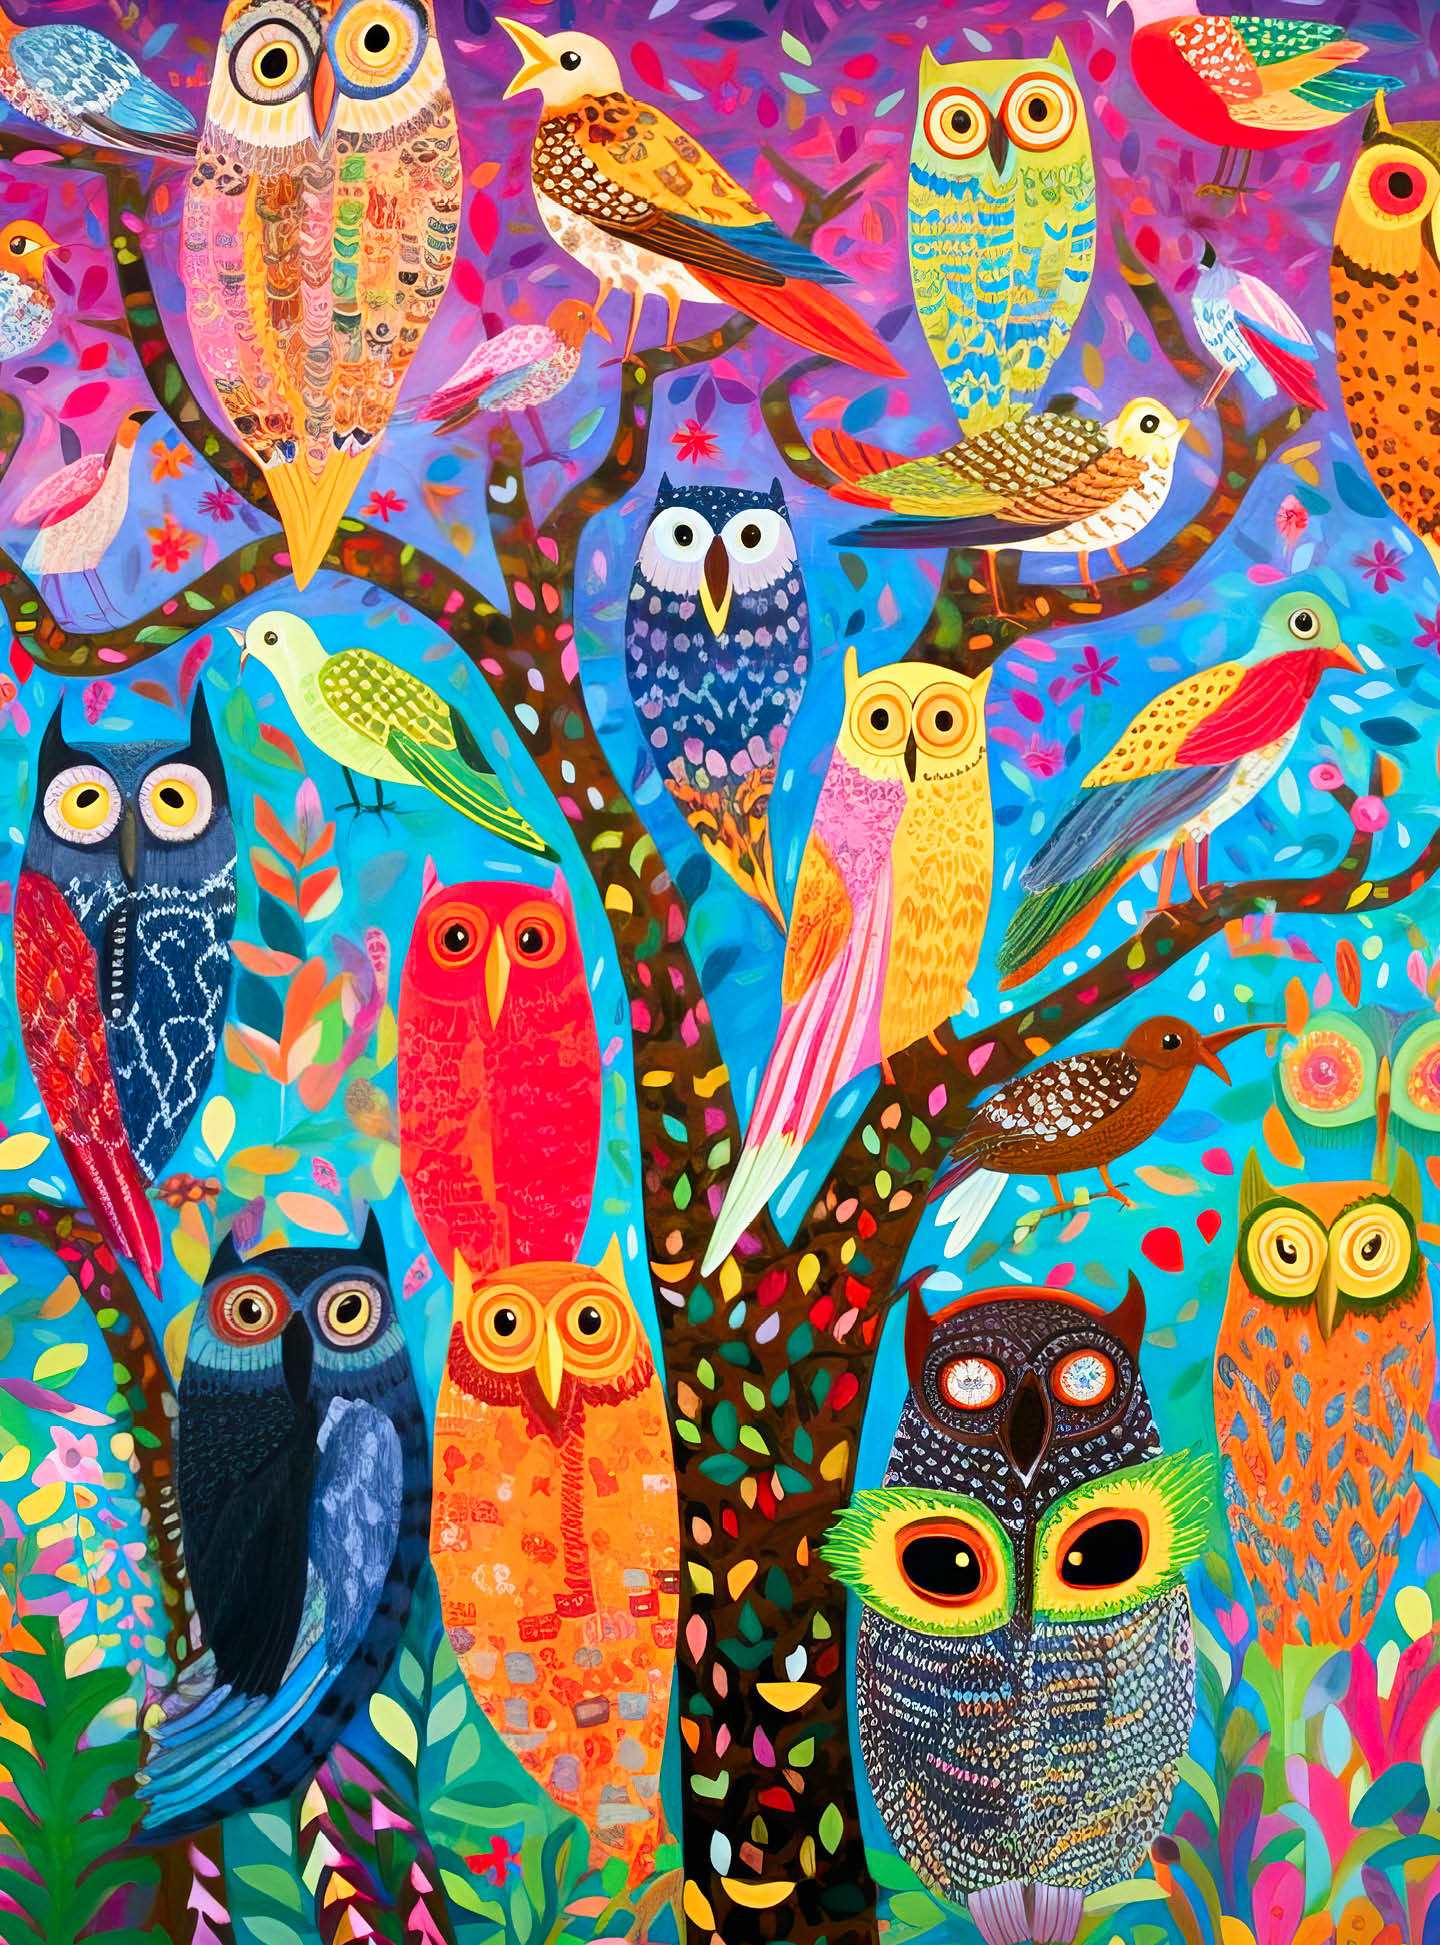 Owl Oasis: The Vibrant Perch - 1000 Piece Jigsaw Puzzle